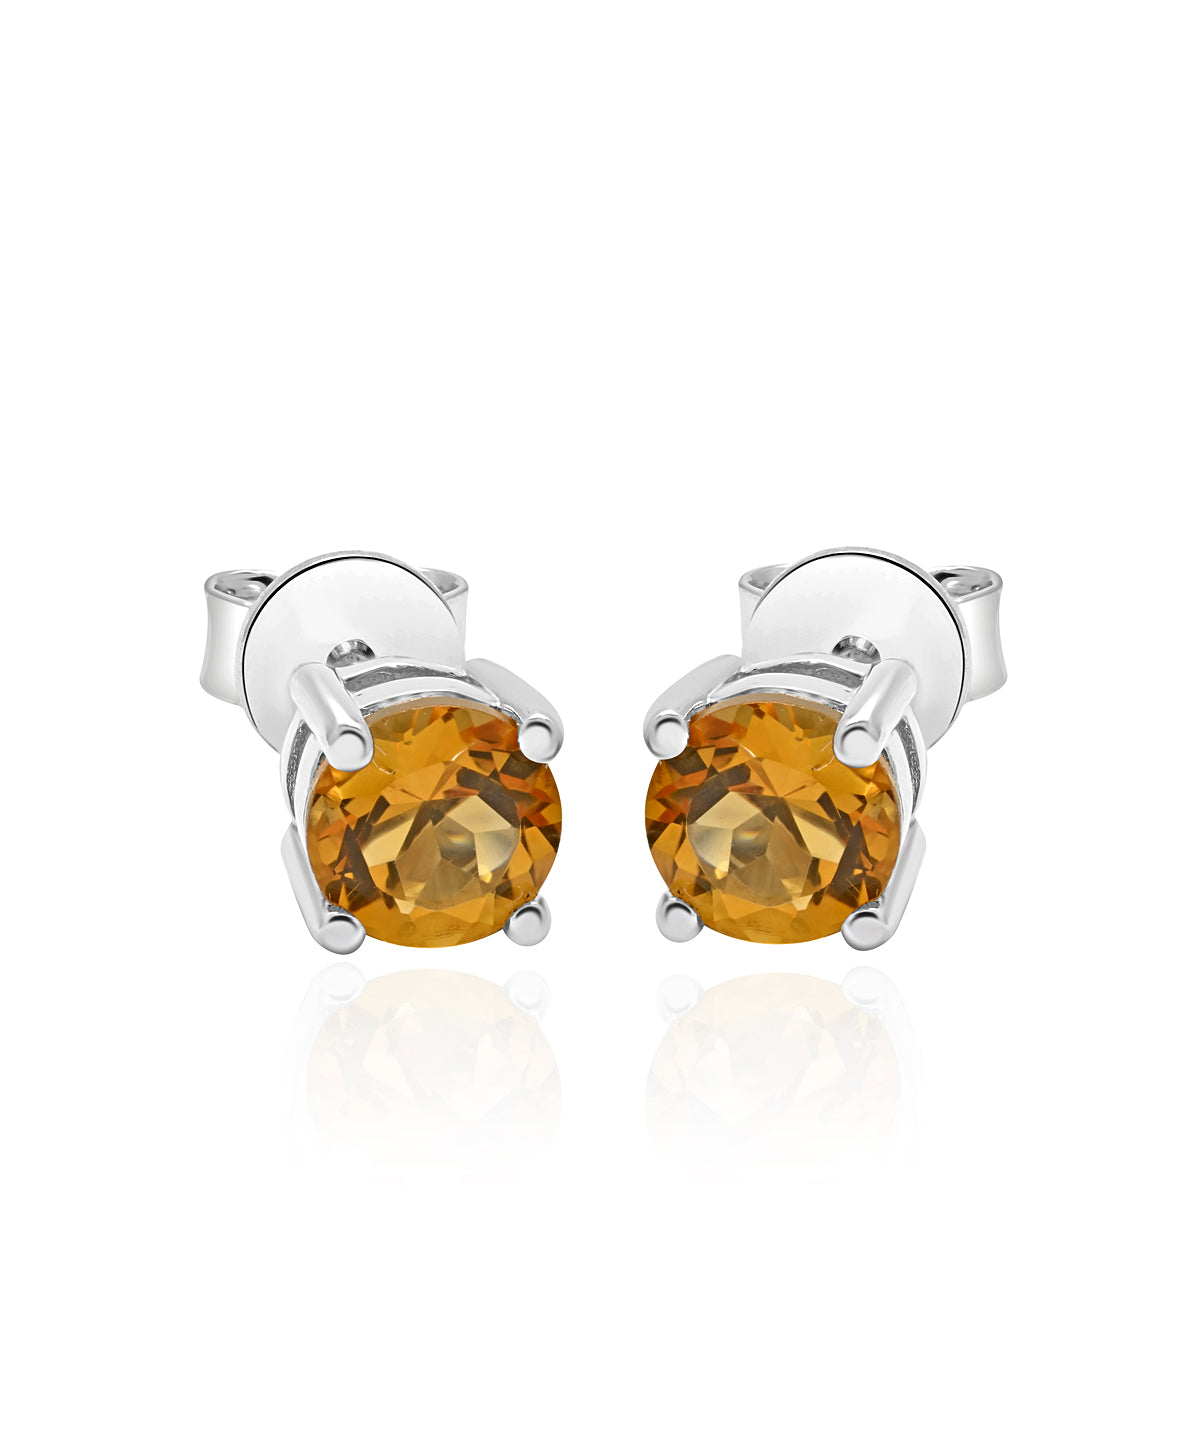 925 Sterling Silver 5mm Citrine 4 Prong Studs